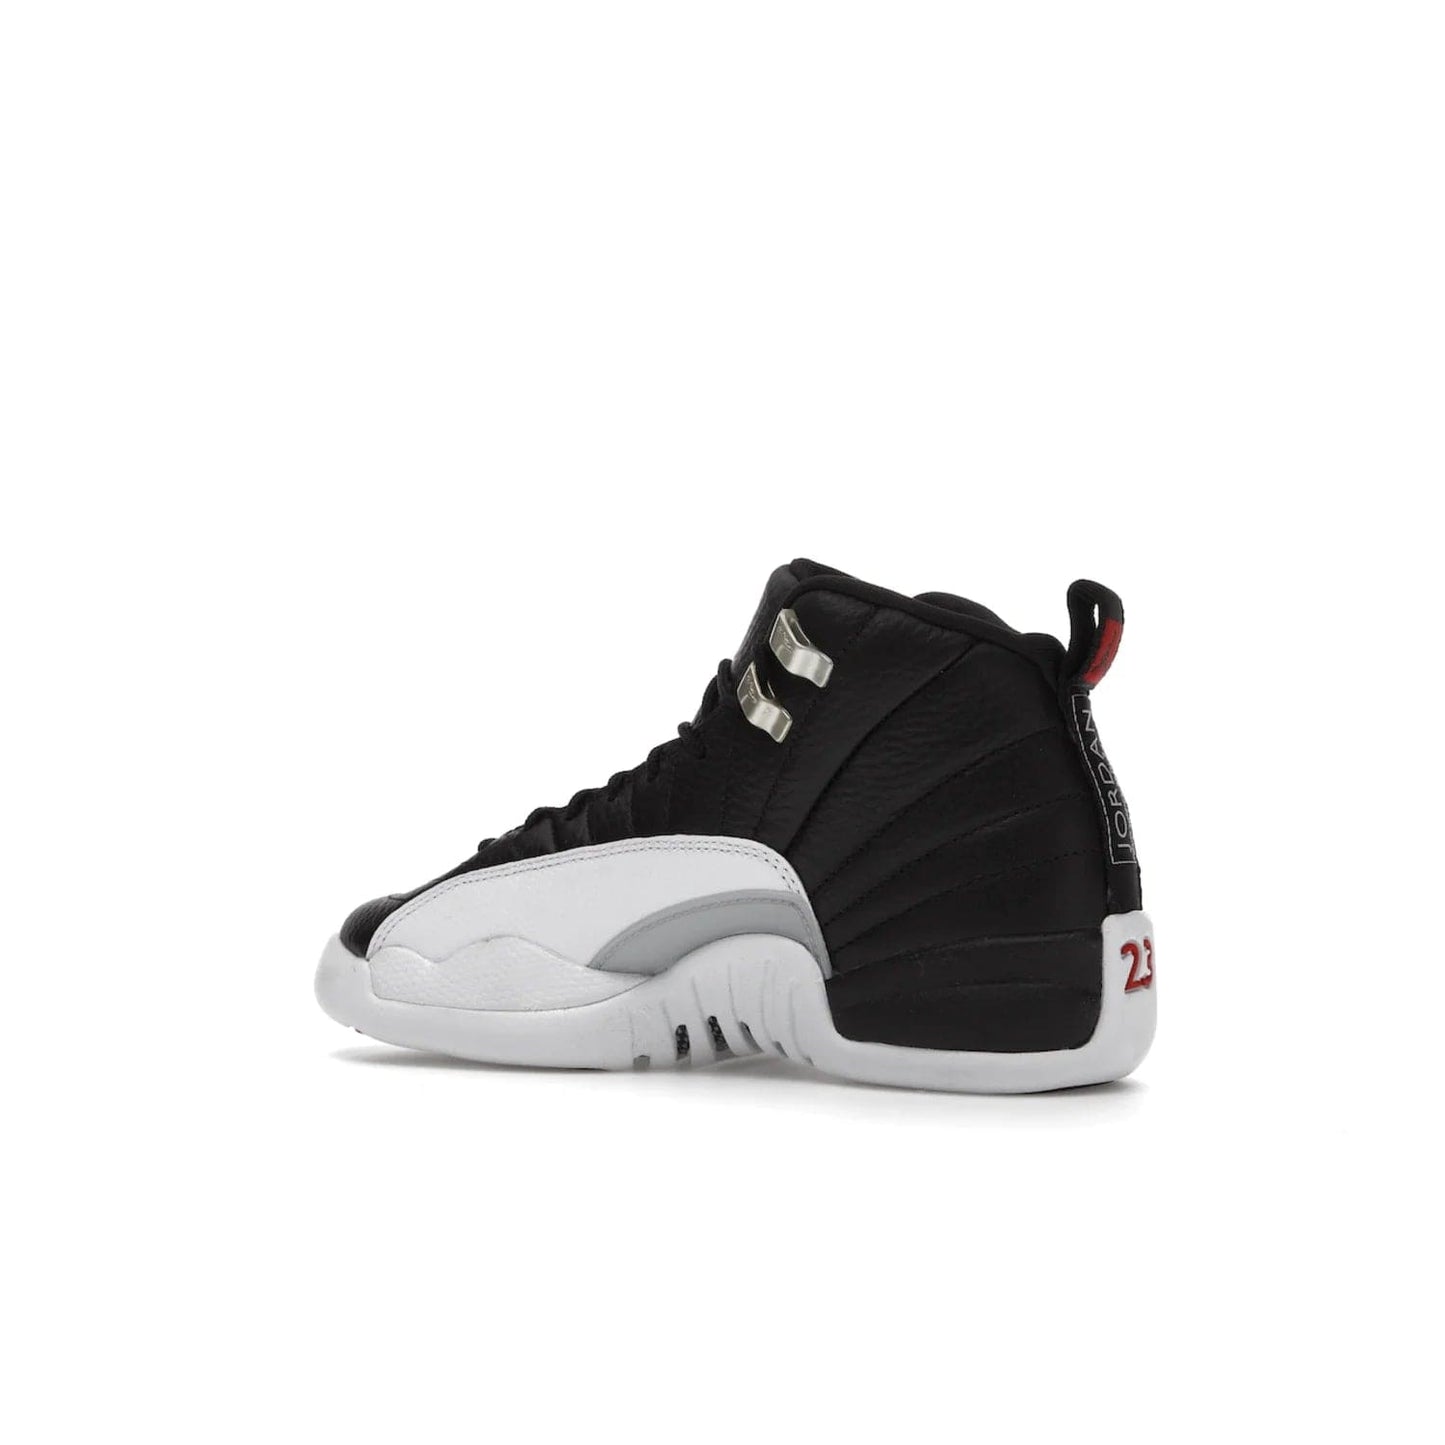 Jordan 12 Retro Playoffs (2022) (GS) - Image 22 - Only at www.BallersClubKickz.com - Air Jordan 12 Retro Playoffs GS 2022 for active young athletes. Comfort and style in a combination of black tumbled leather, white textured overlays and red/white/black outsole. Eye-catching details and signature carbon fiber shank plate.